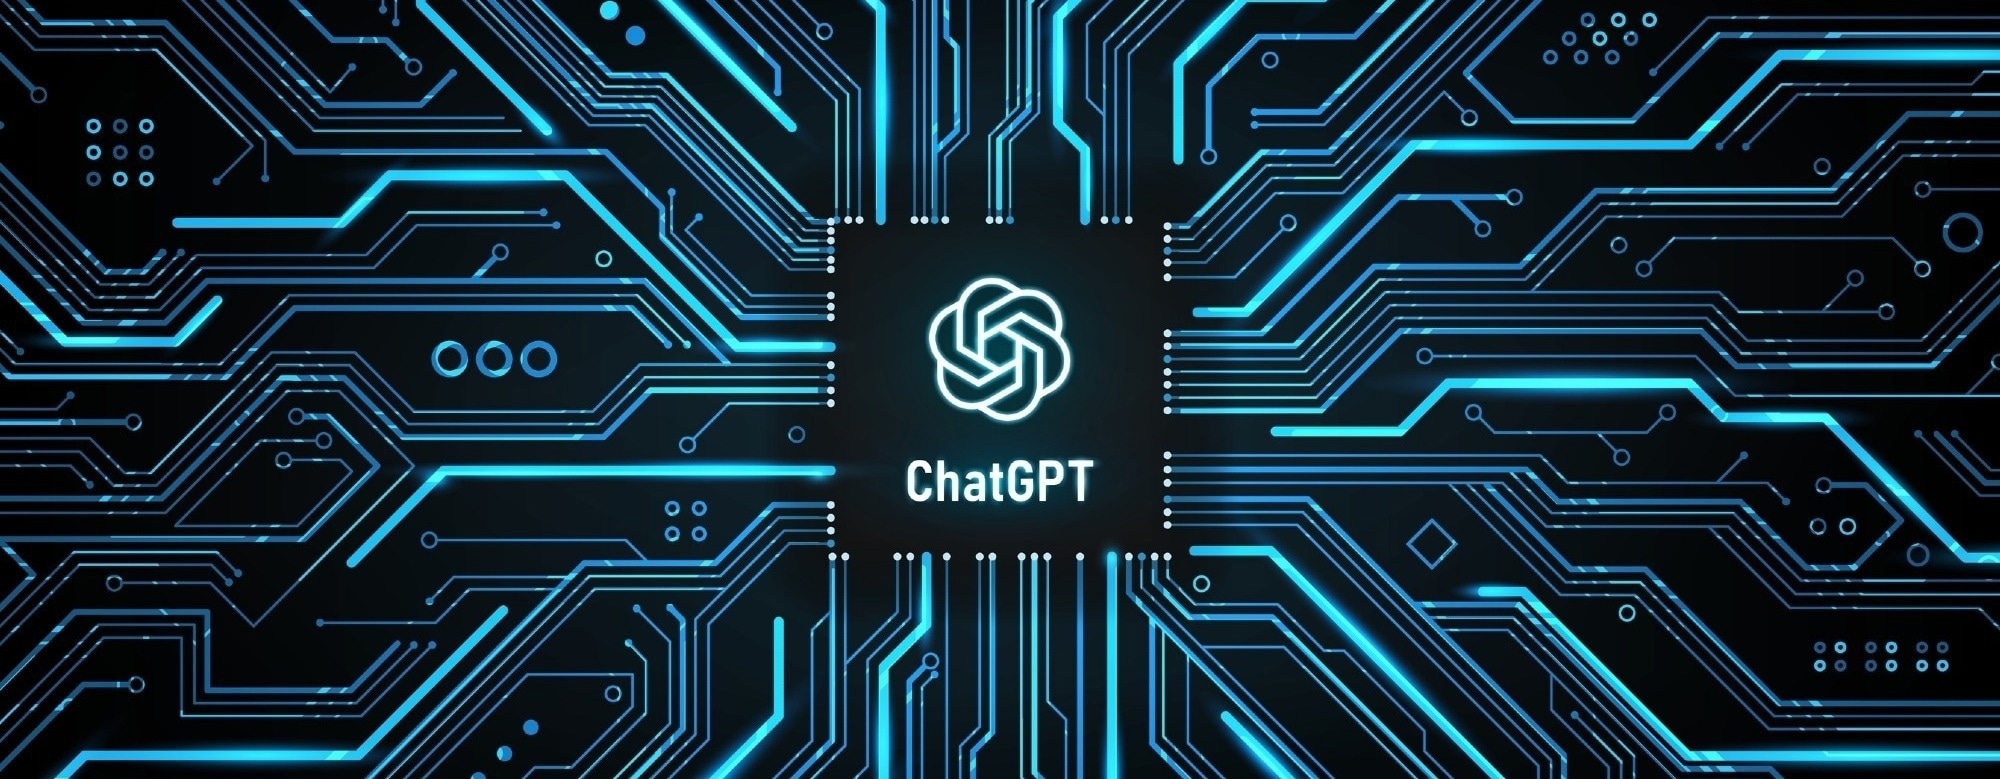 What's Next for a Post-ChatGPT World?